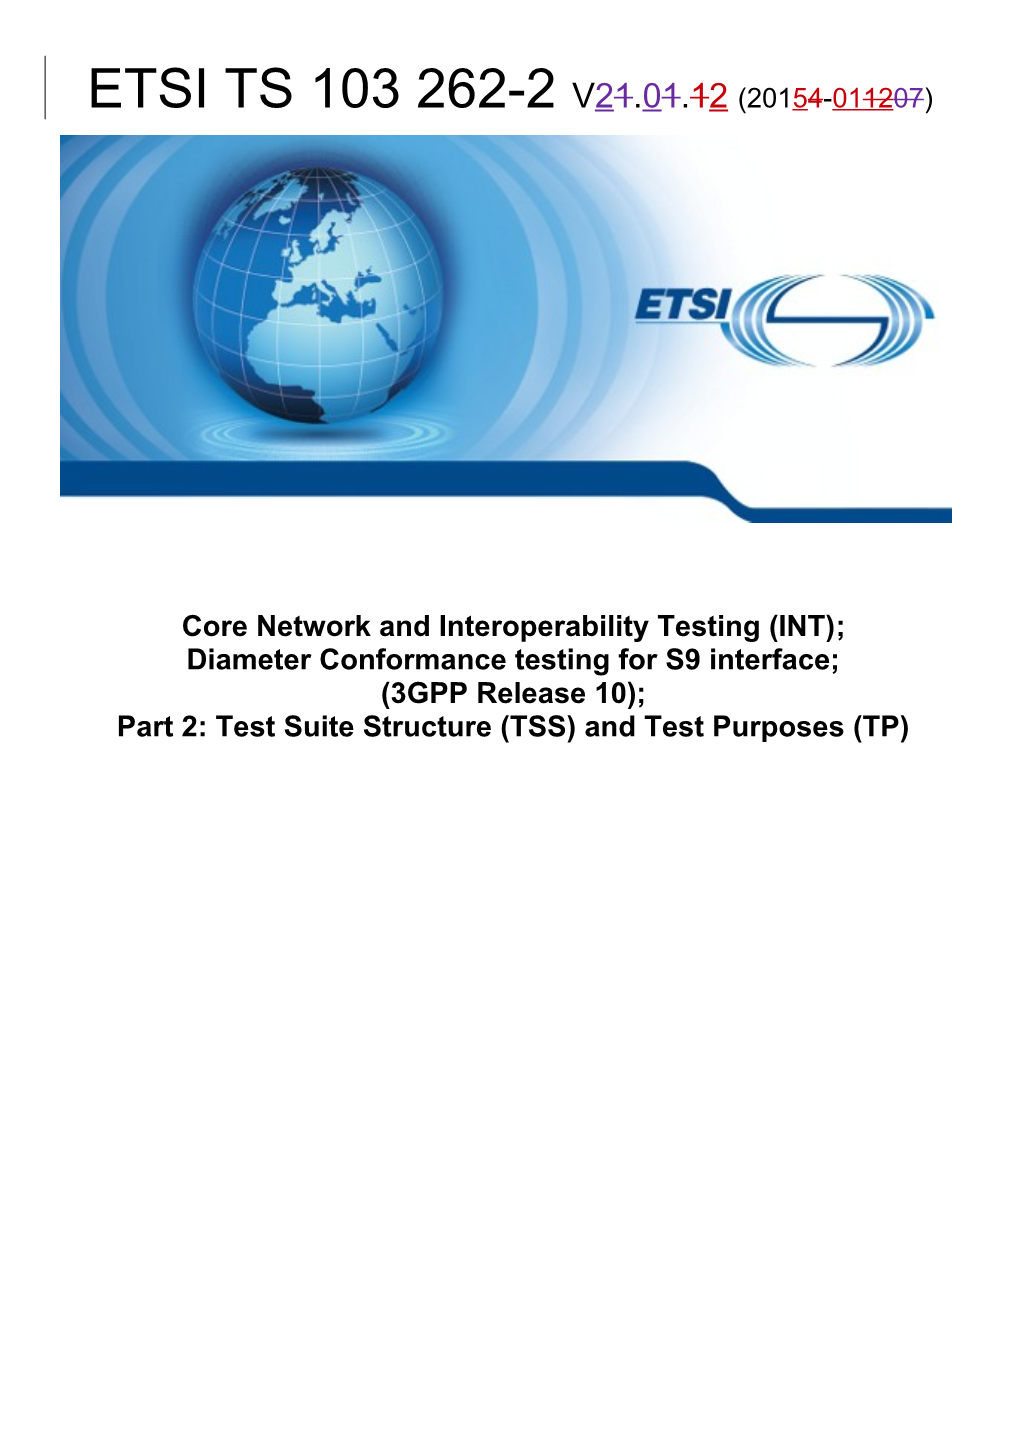 Core Network and Interoperability Testing (INT);